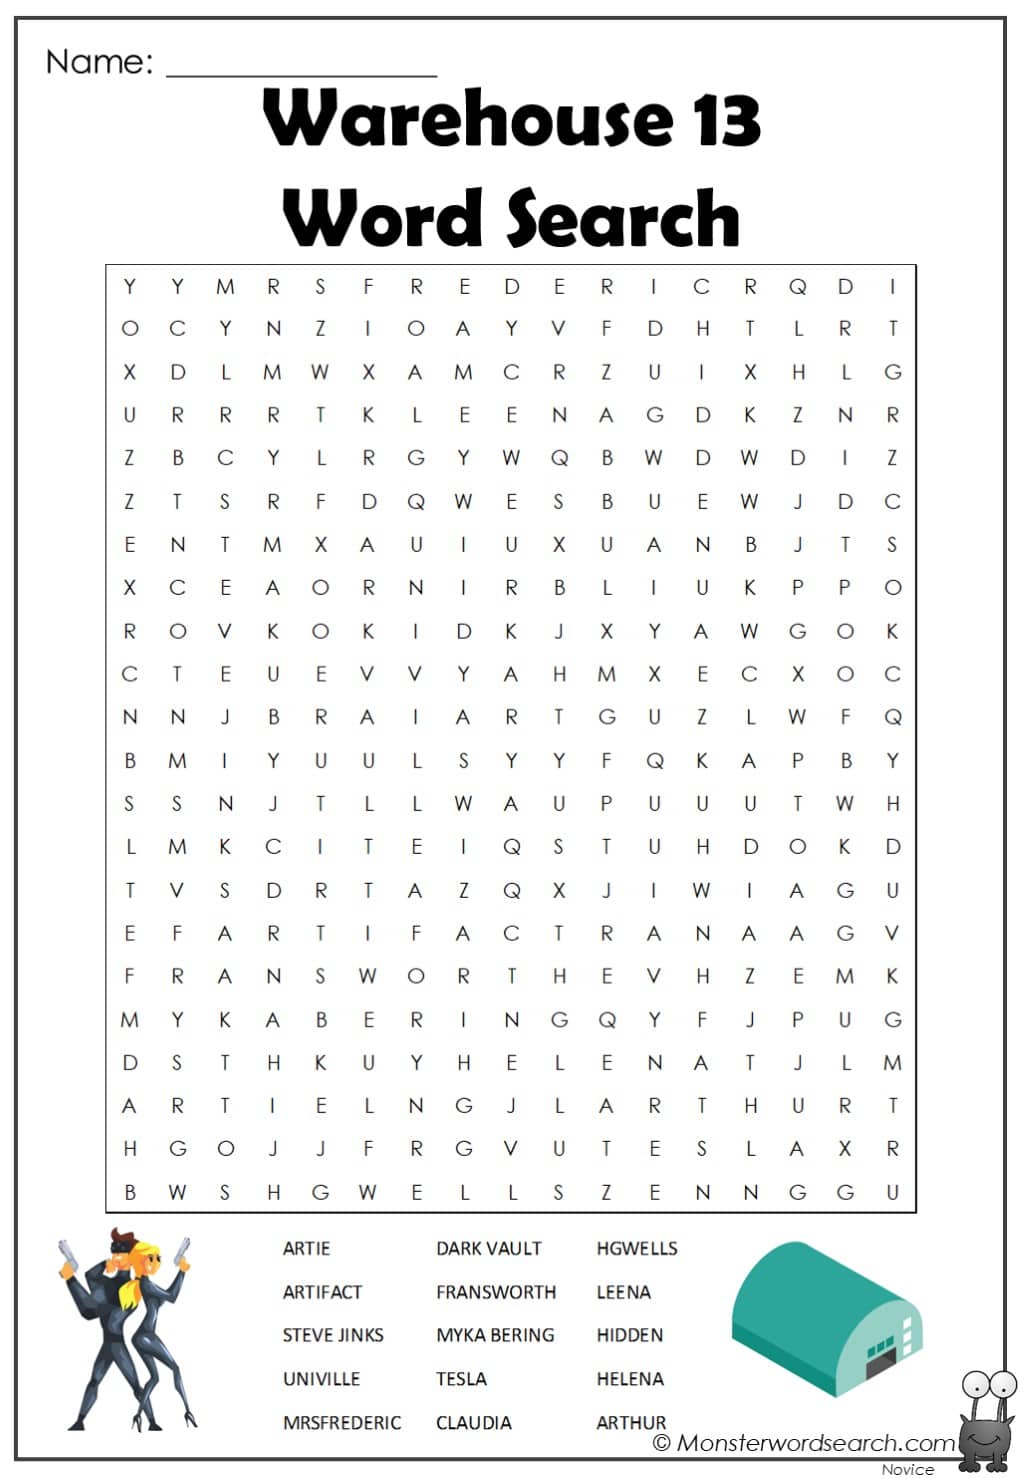 Warehouse 13 Word Search